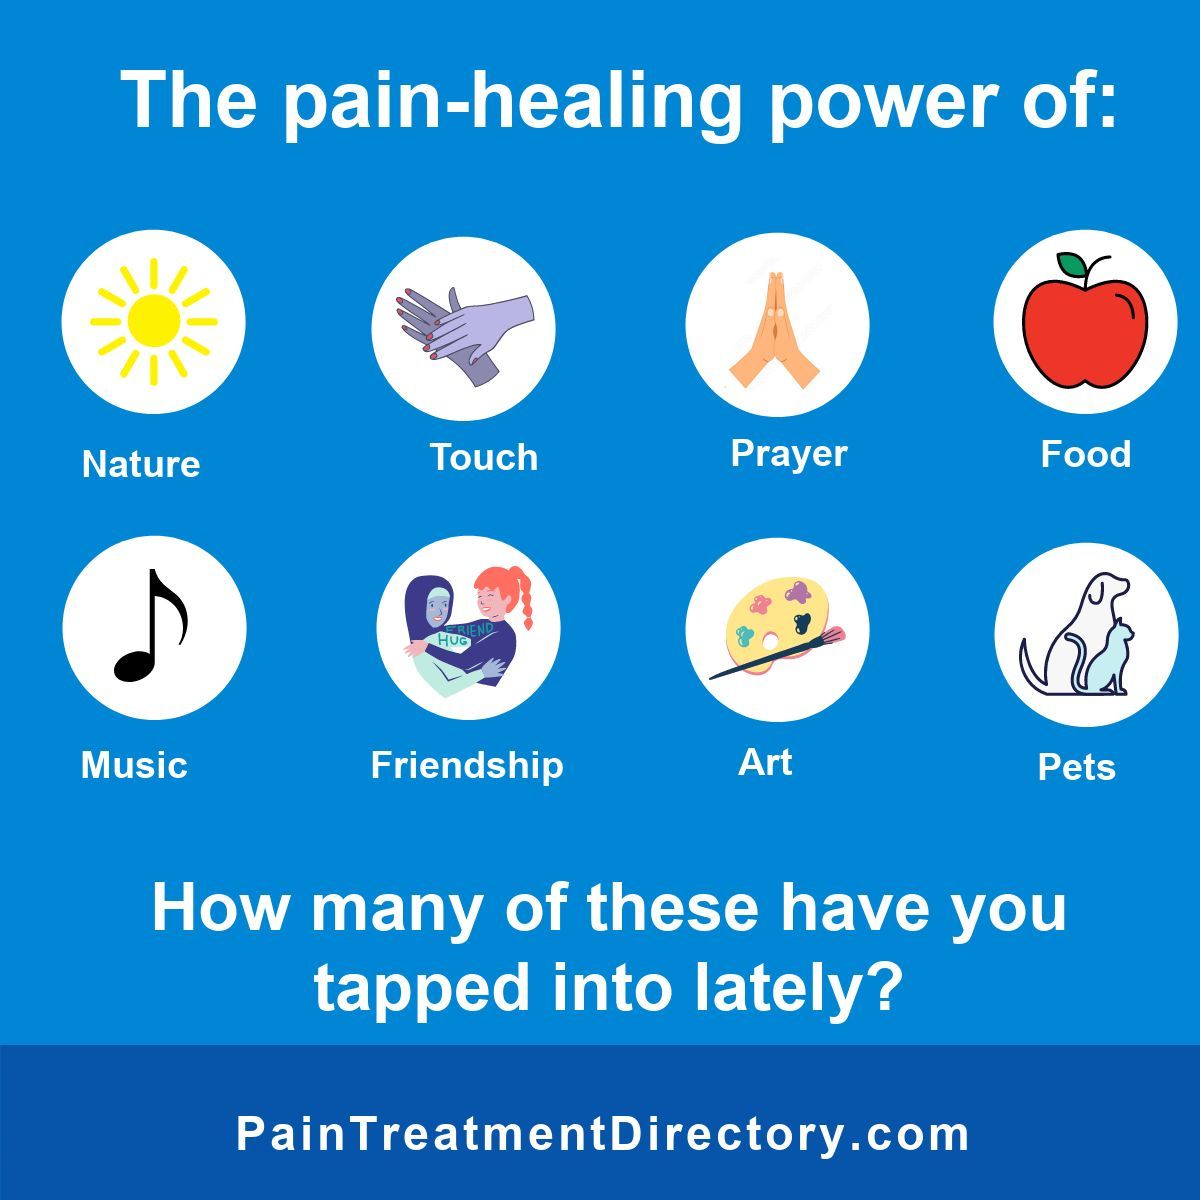 Pain treatment can be FUN!  Learn more: buff.ly/3zqvQwO
-
#paintreatment #chronicpain #PainRelief